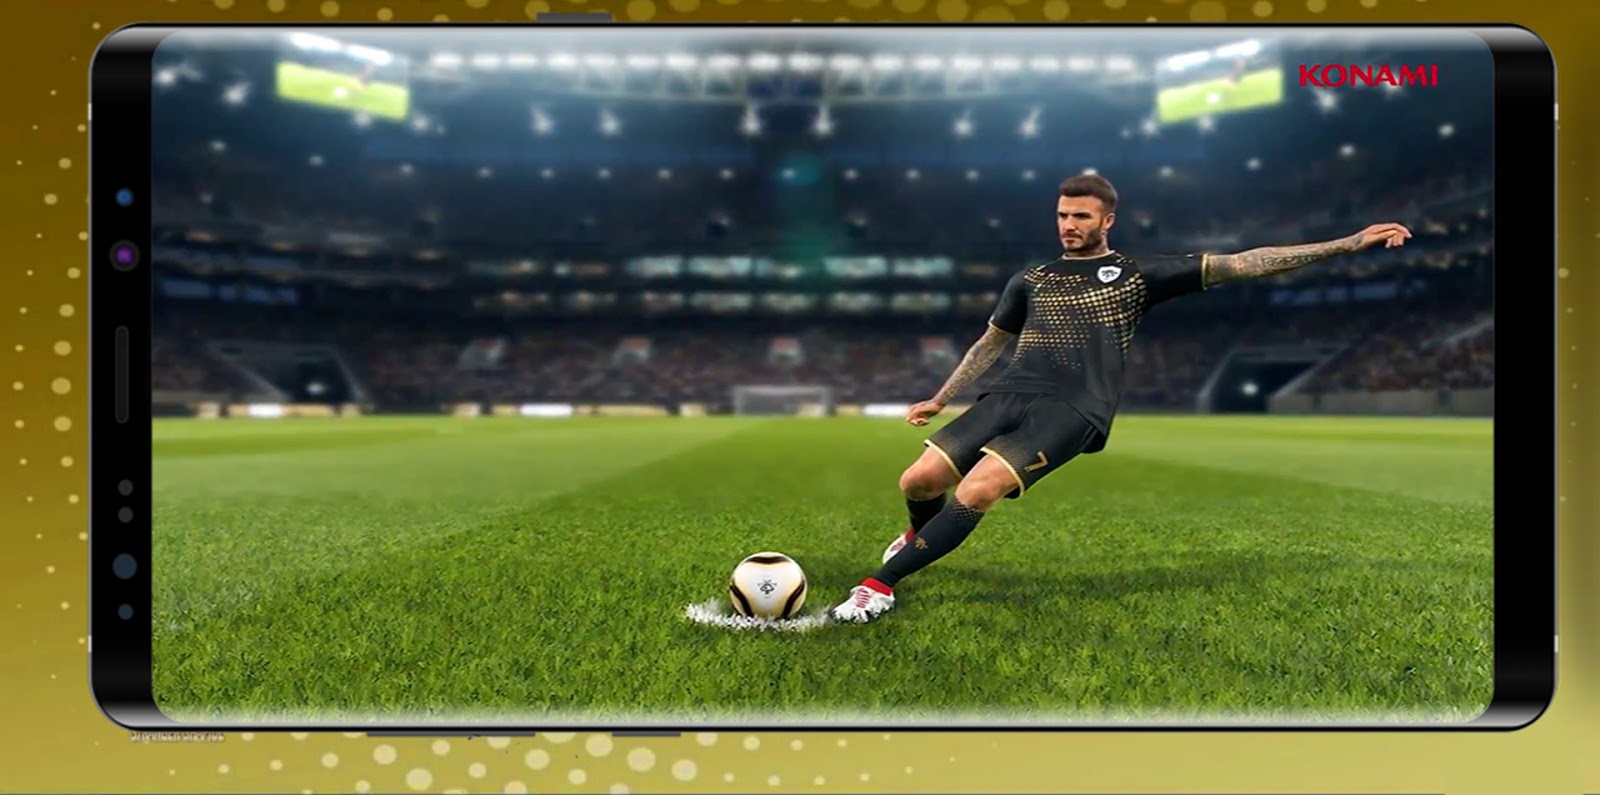 NEW MOD PATCH FOR PES 2019 MOBIL 